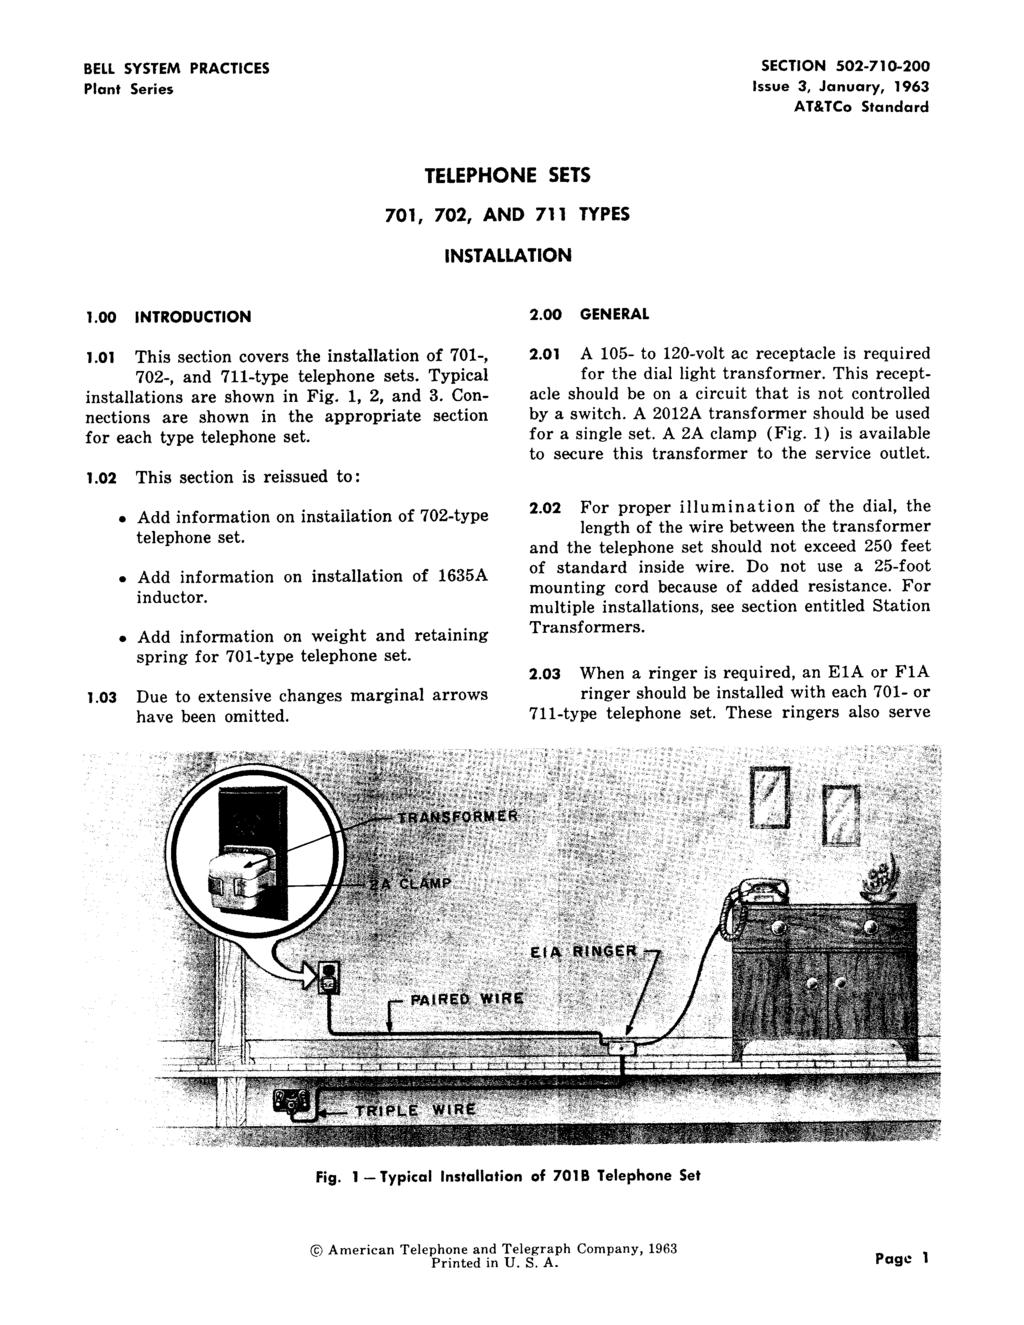 BELLSYSTEM PRACTICES SECTION 502-710-200 Plant Series Issue 3, January, 1963 AT&TCo Standard TELEPHONE SETS 701, 702, AND 711 TYPES INSTALLATION 1.00 INTRODUCTION 2.00 GENERAL 1.